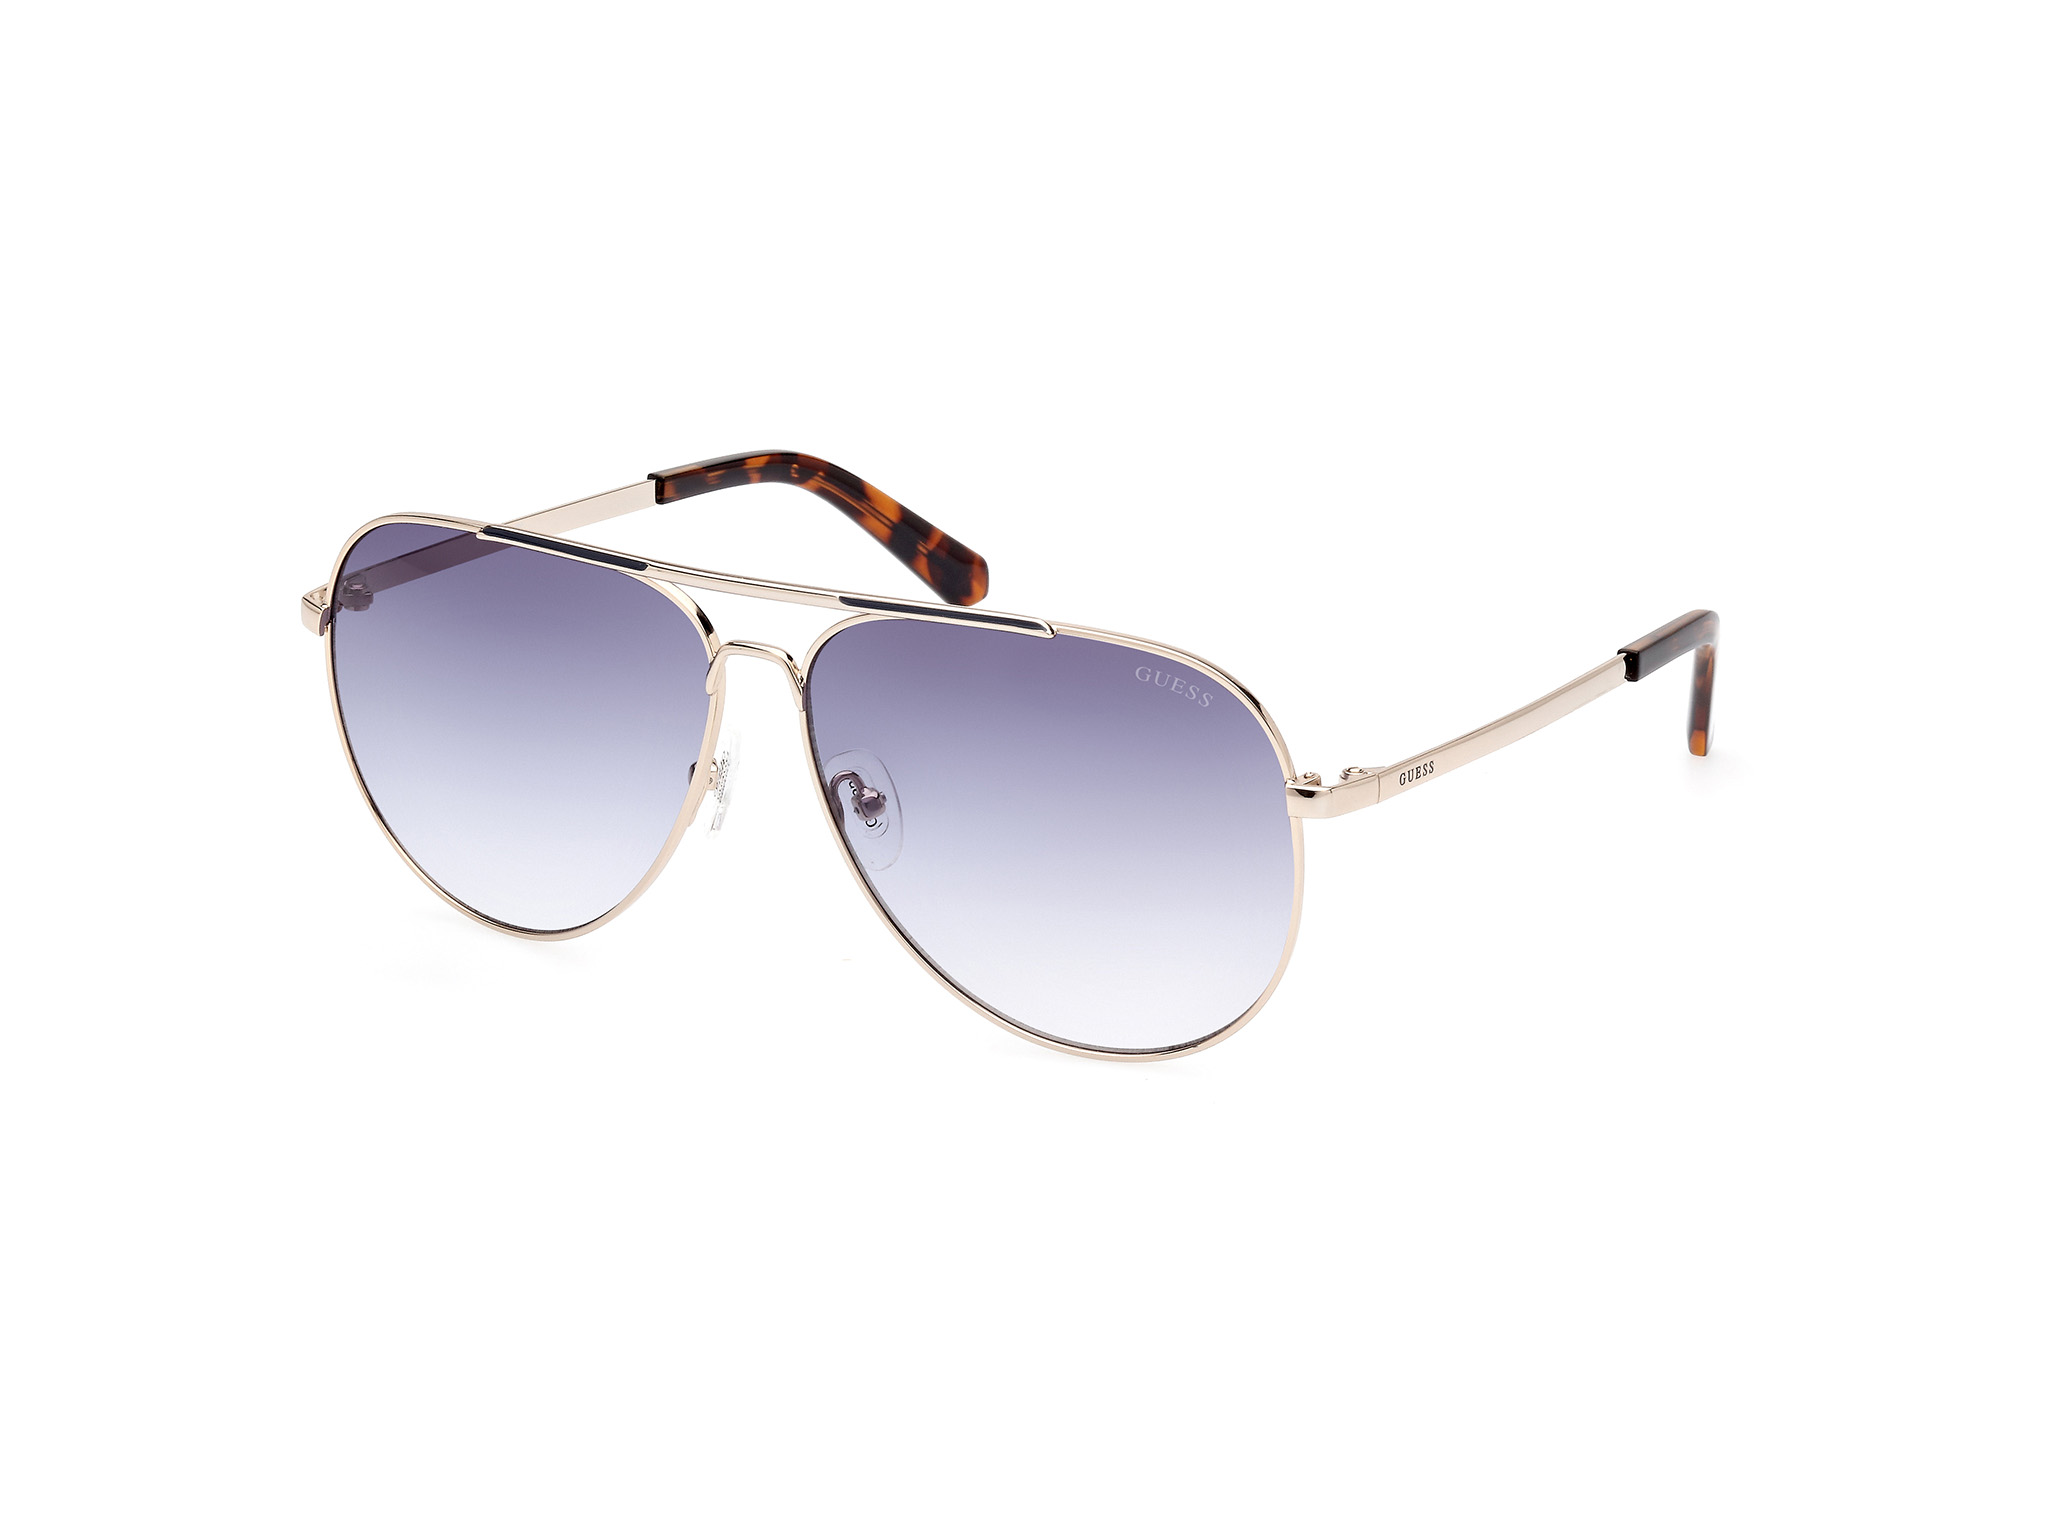 Guess Eyewear Collection - Marcolin